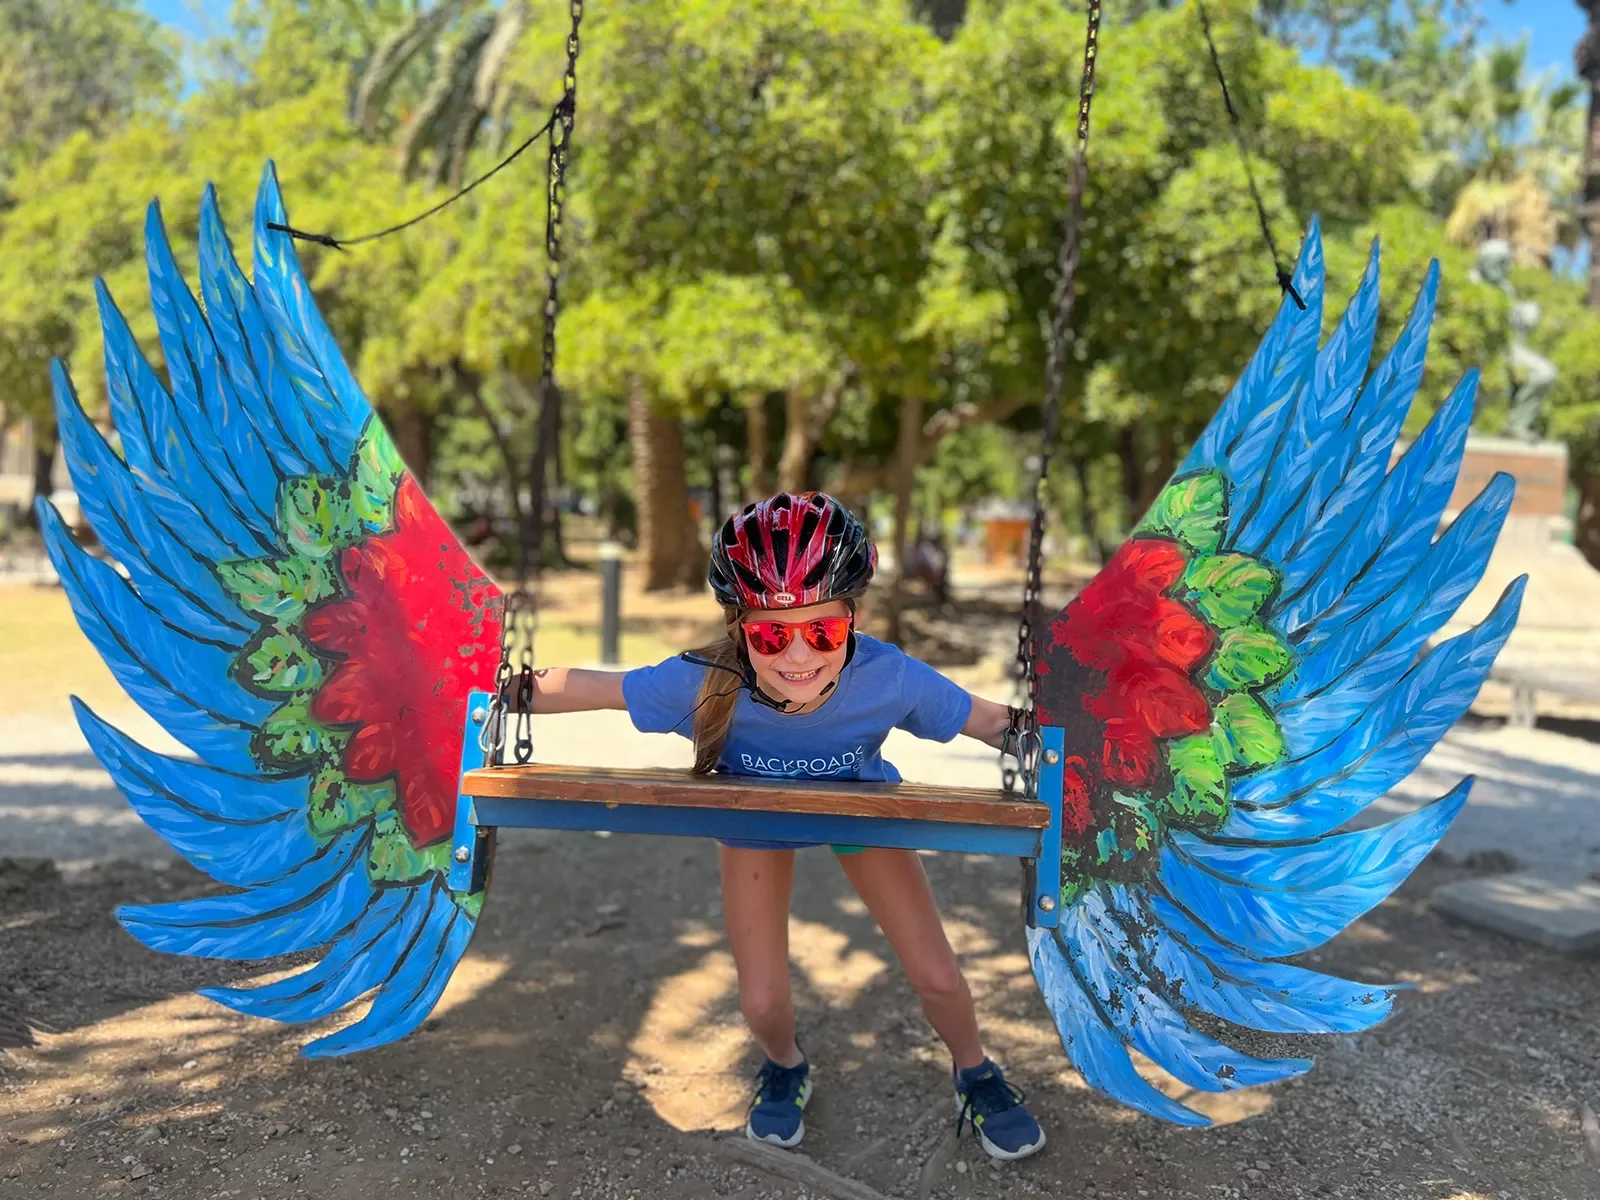 Young guest in bike gear on swing, colorful bird wings attached to it.